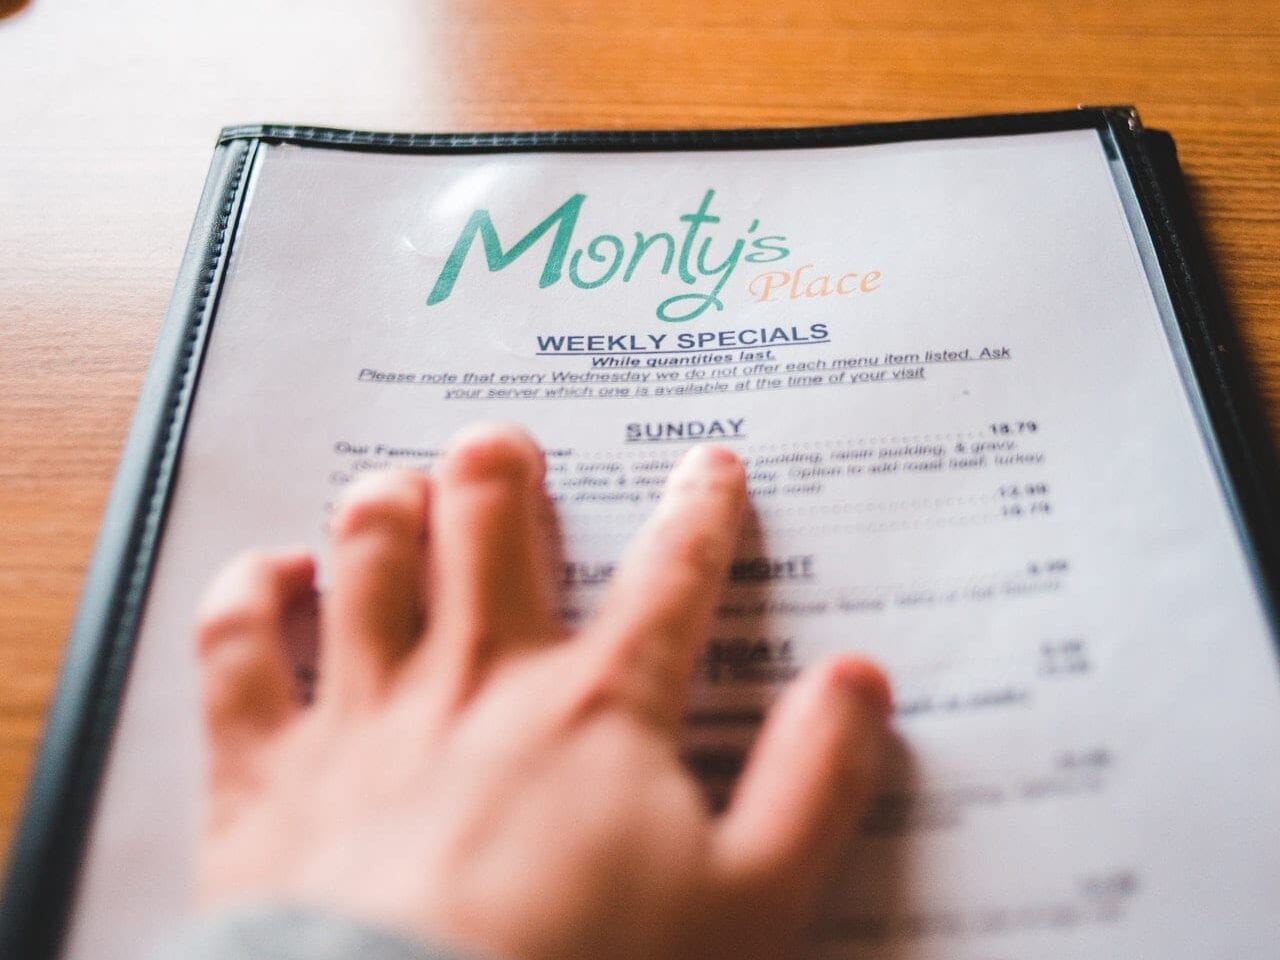 a hand scrolling across items on disposable menus
